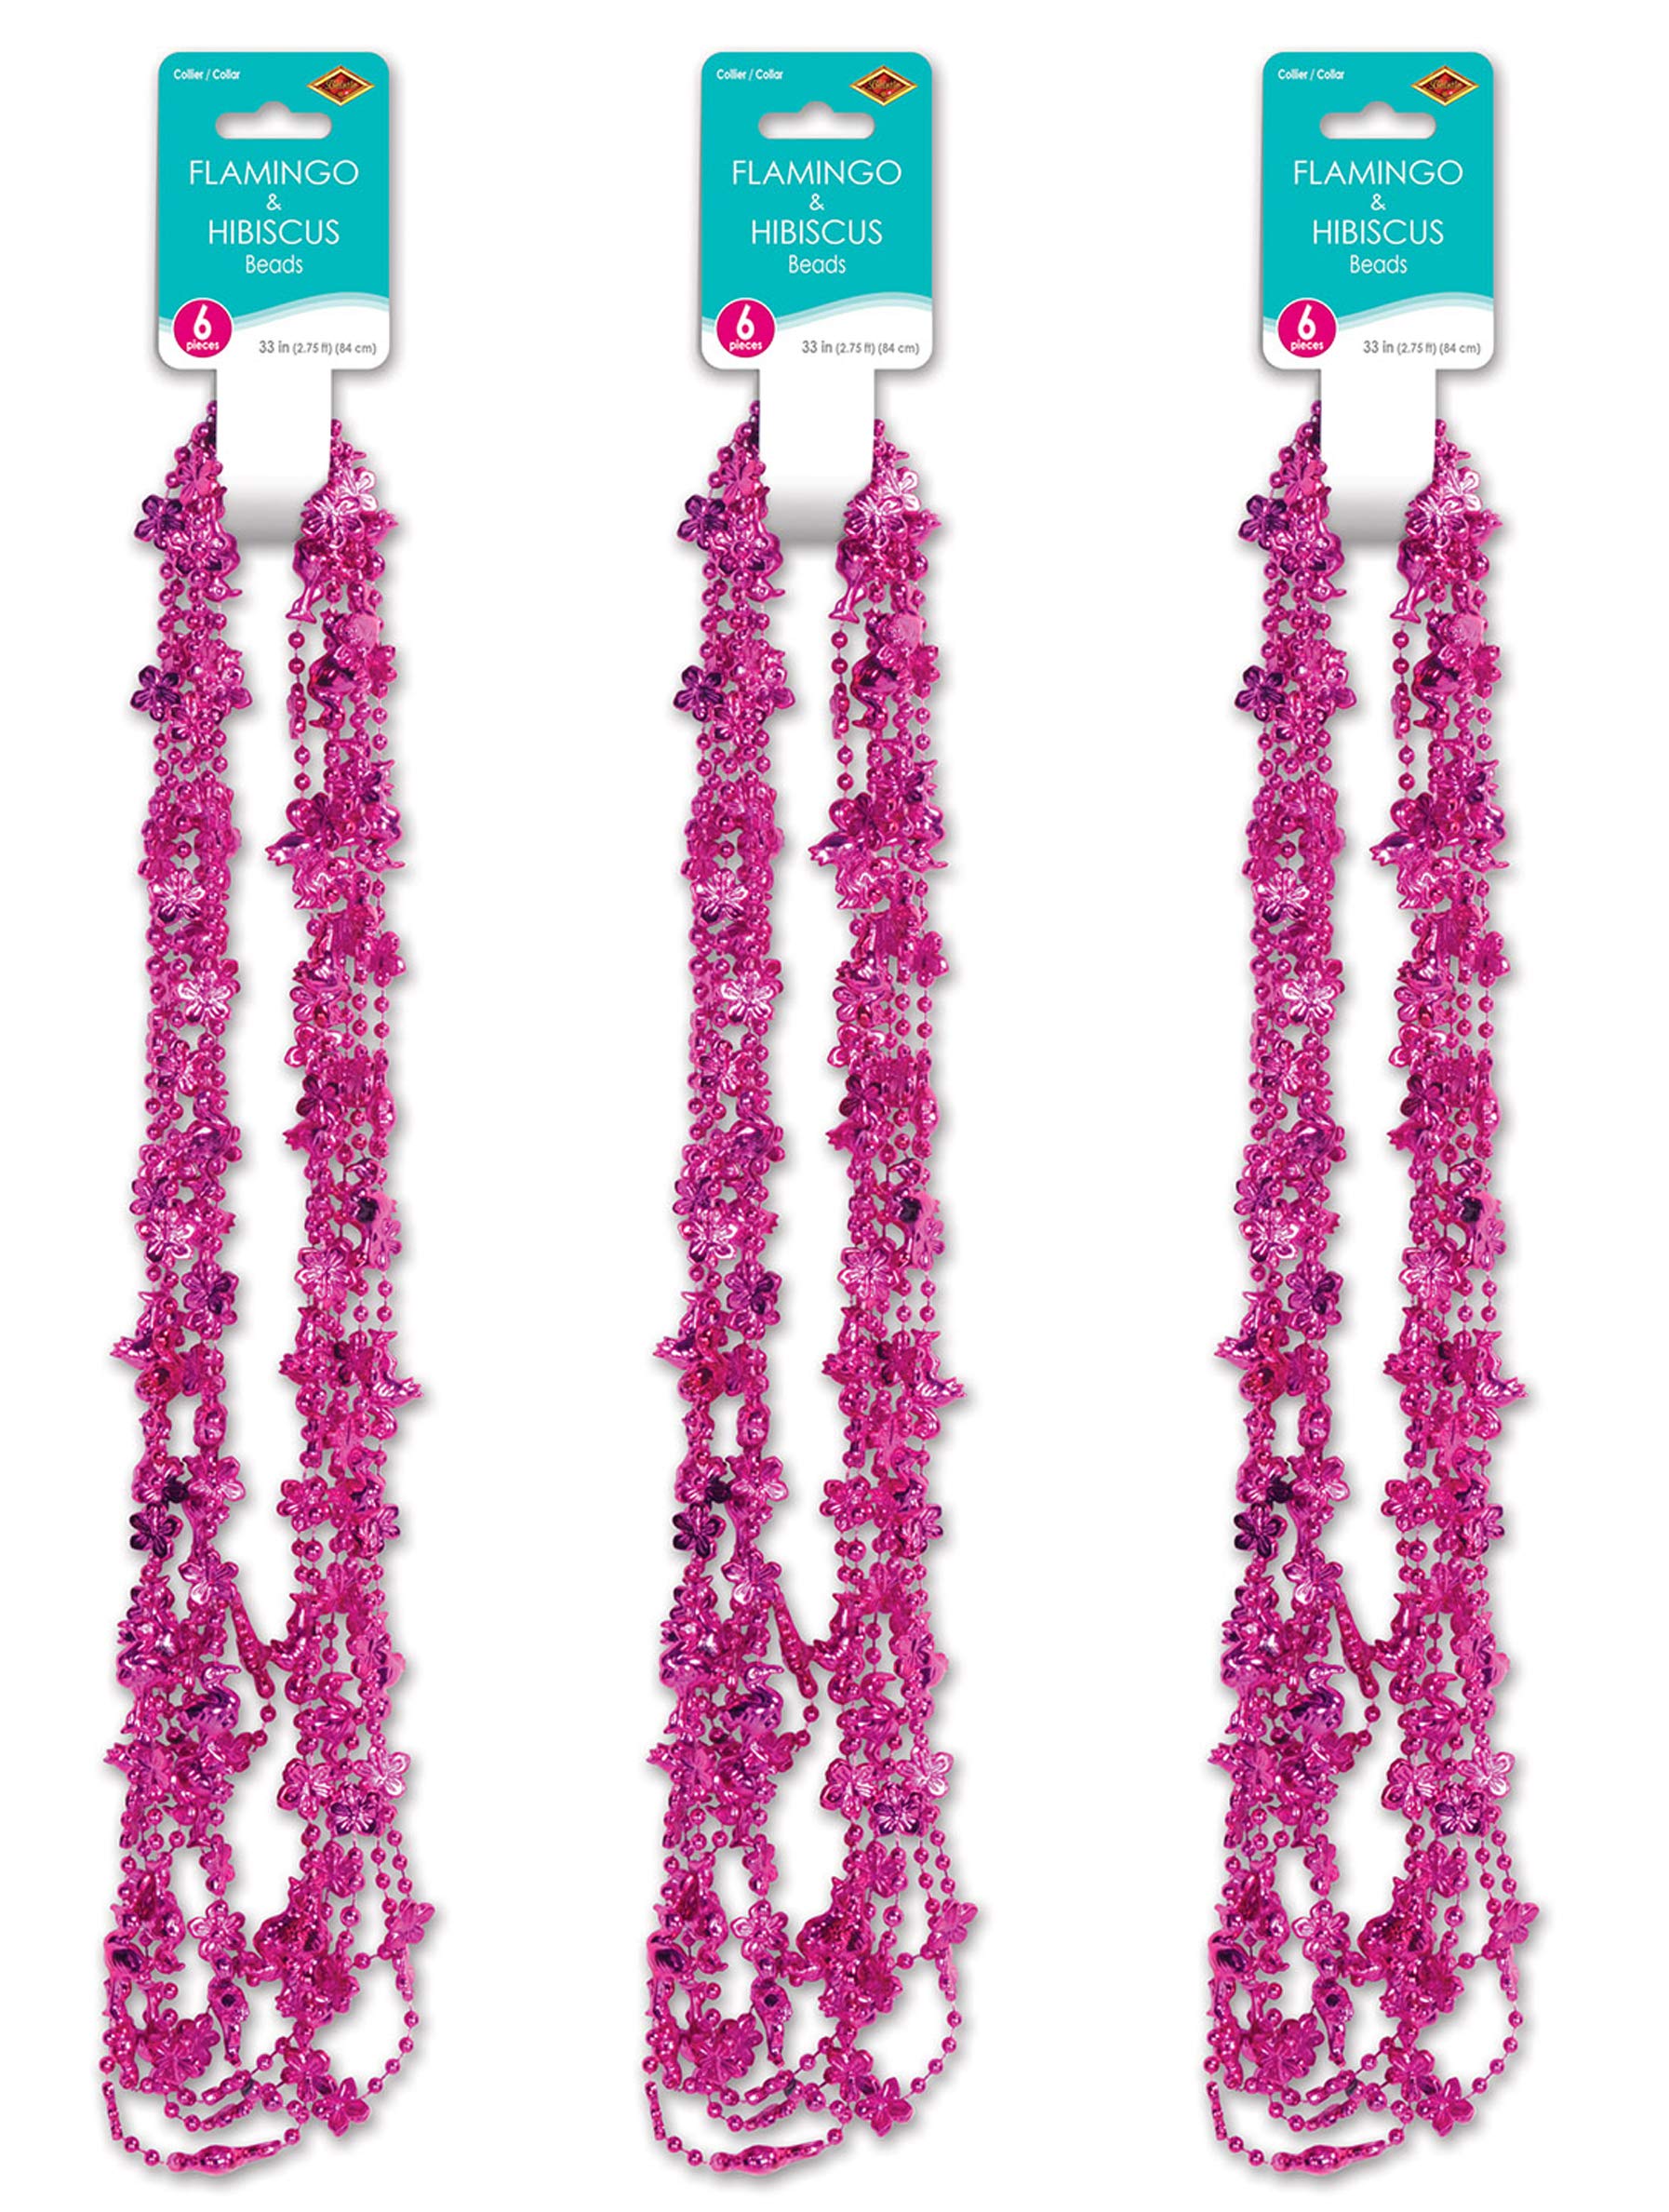 Beistle unisex 18 Piece Pink Plastic Flamingo And Hibiscus Beaded Necklaces Hawaiian Tropical Luau Party Favor Supplies, 33